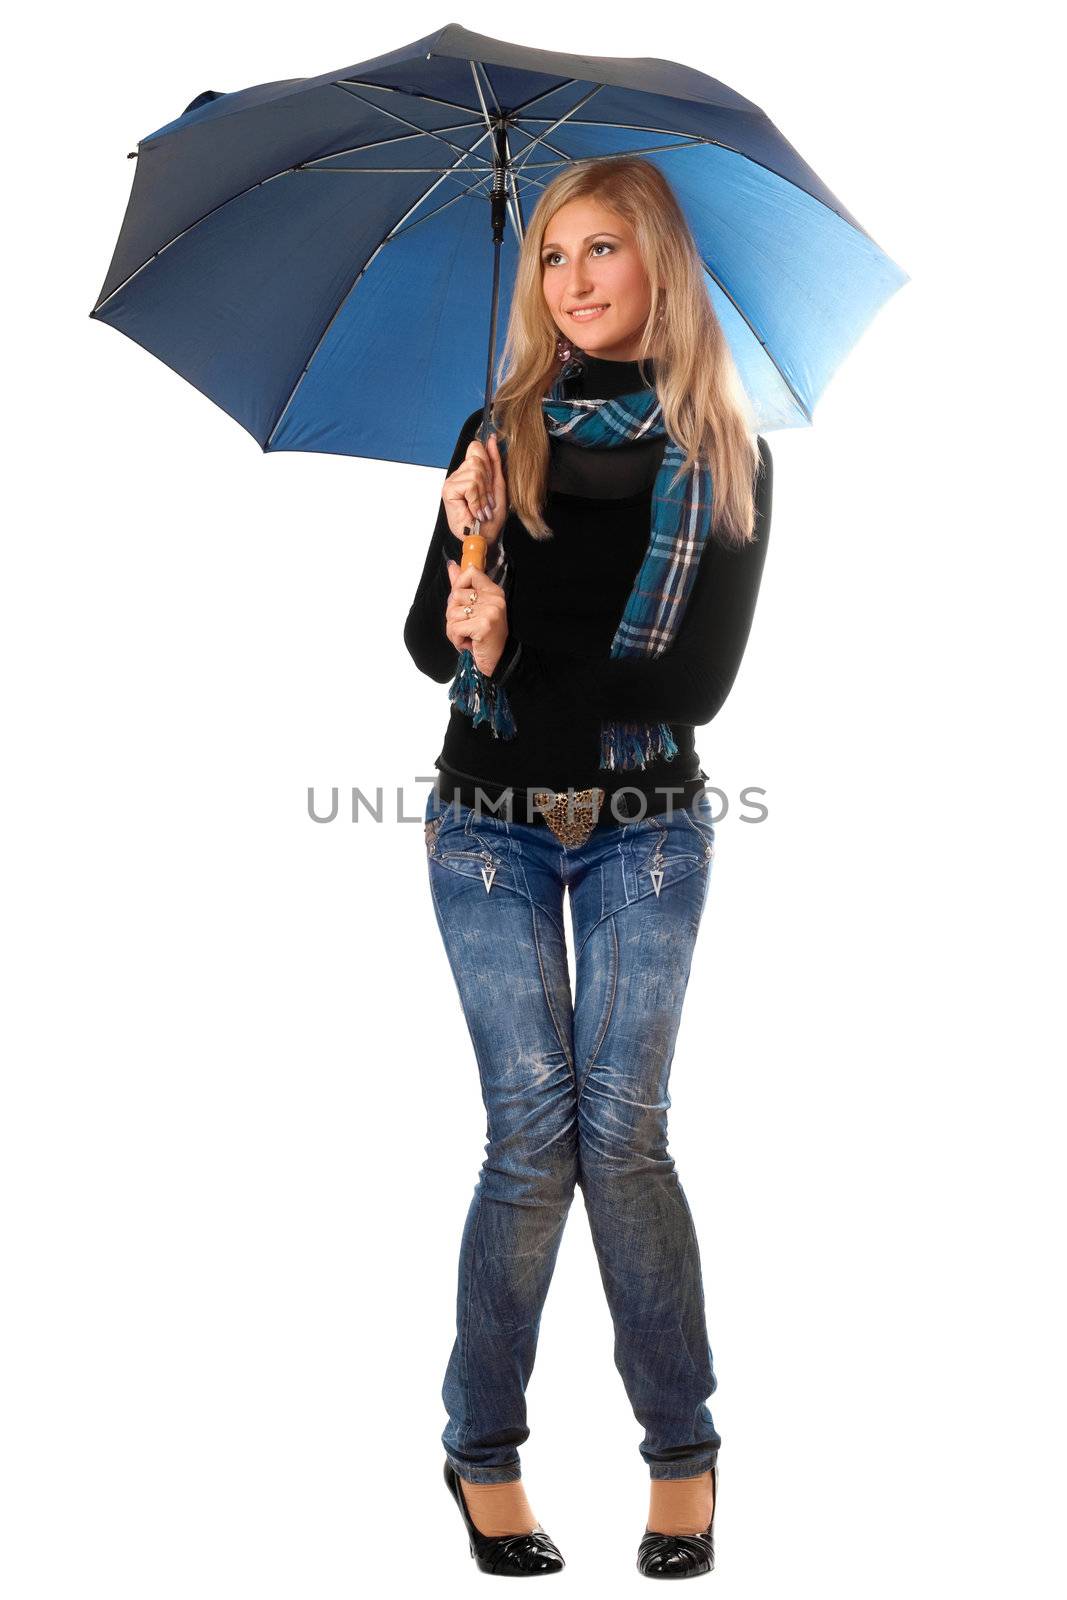 Beautiful smiling blonde with blue umbrella by acidgrey